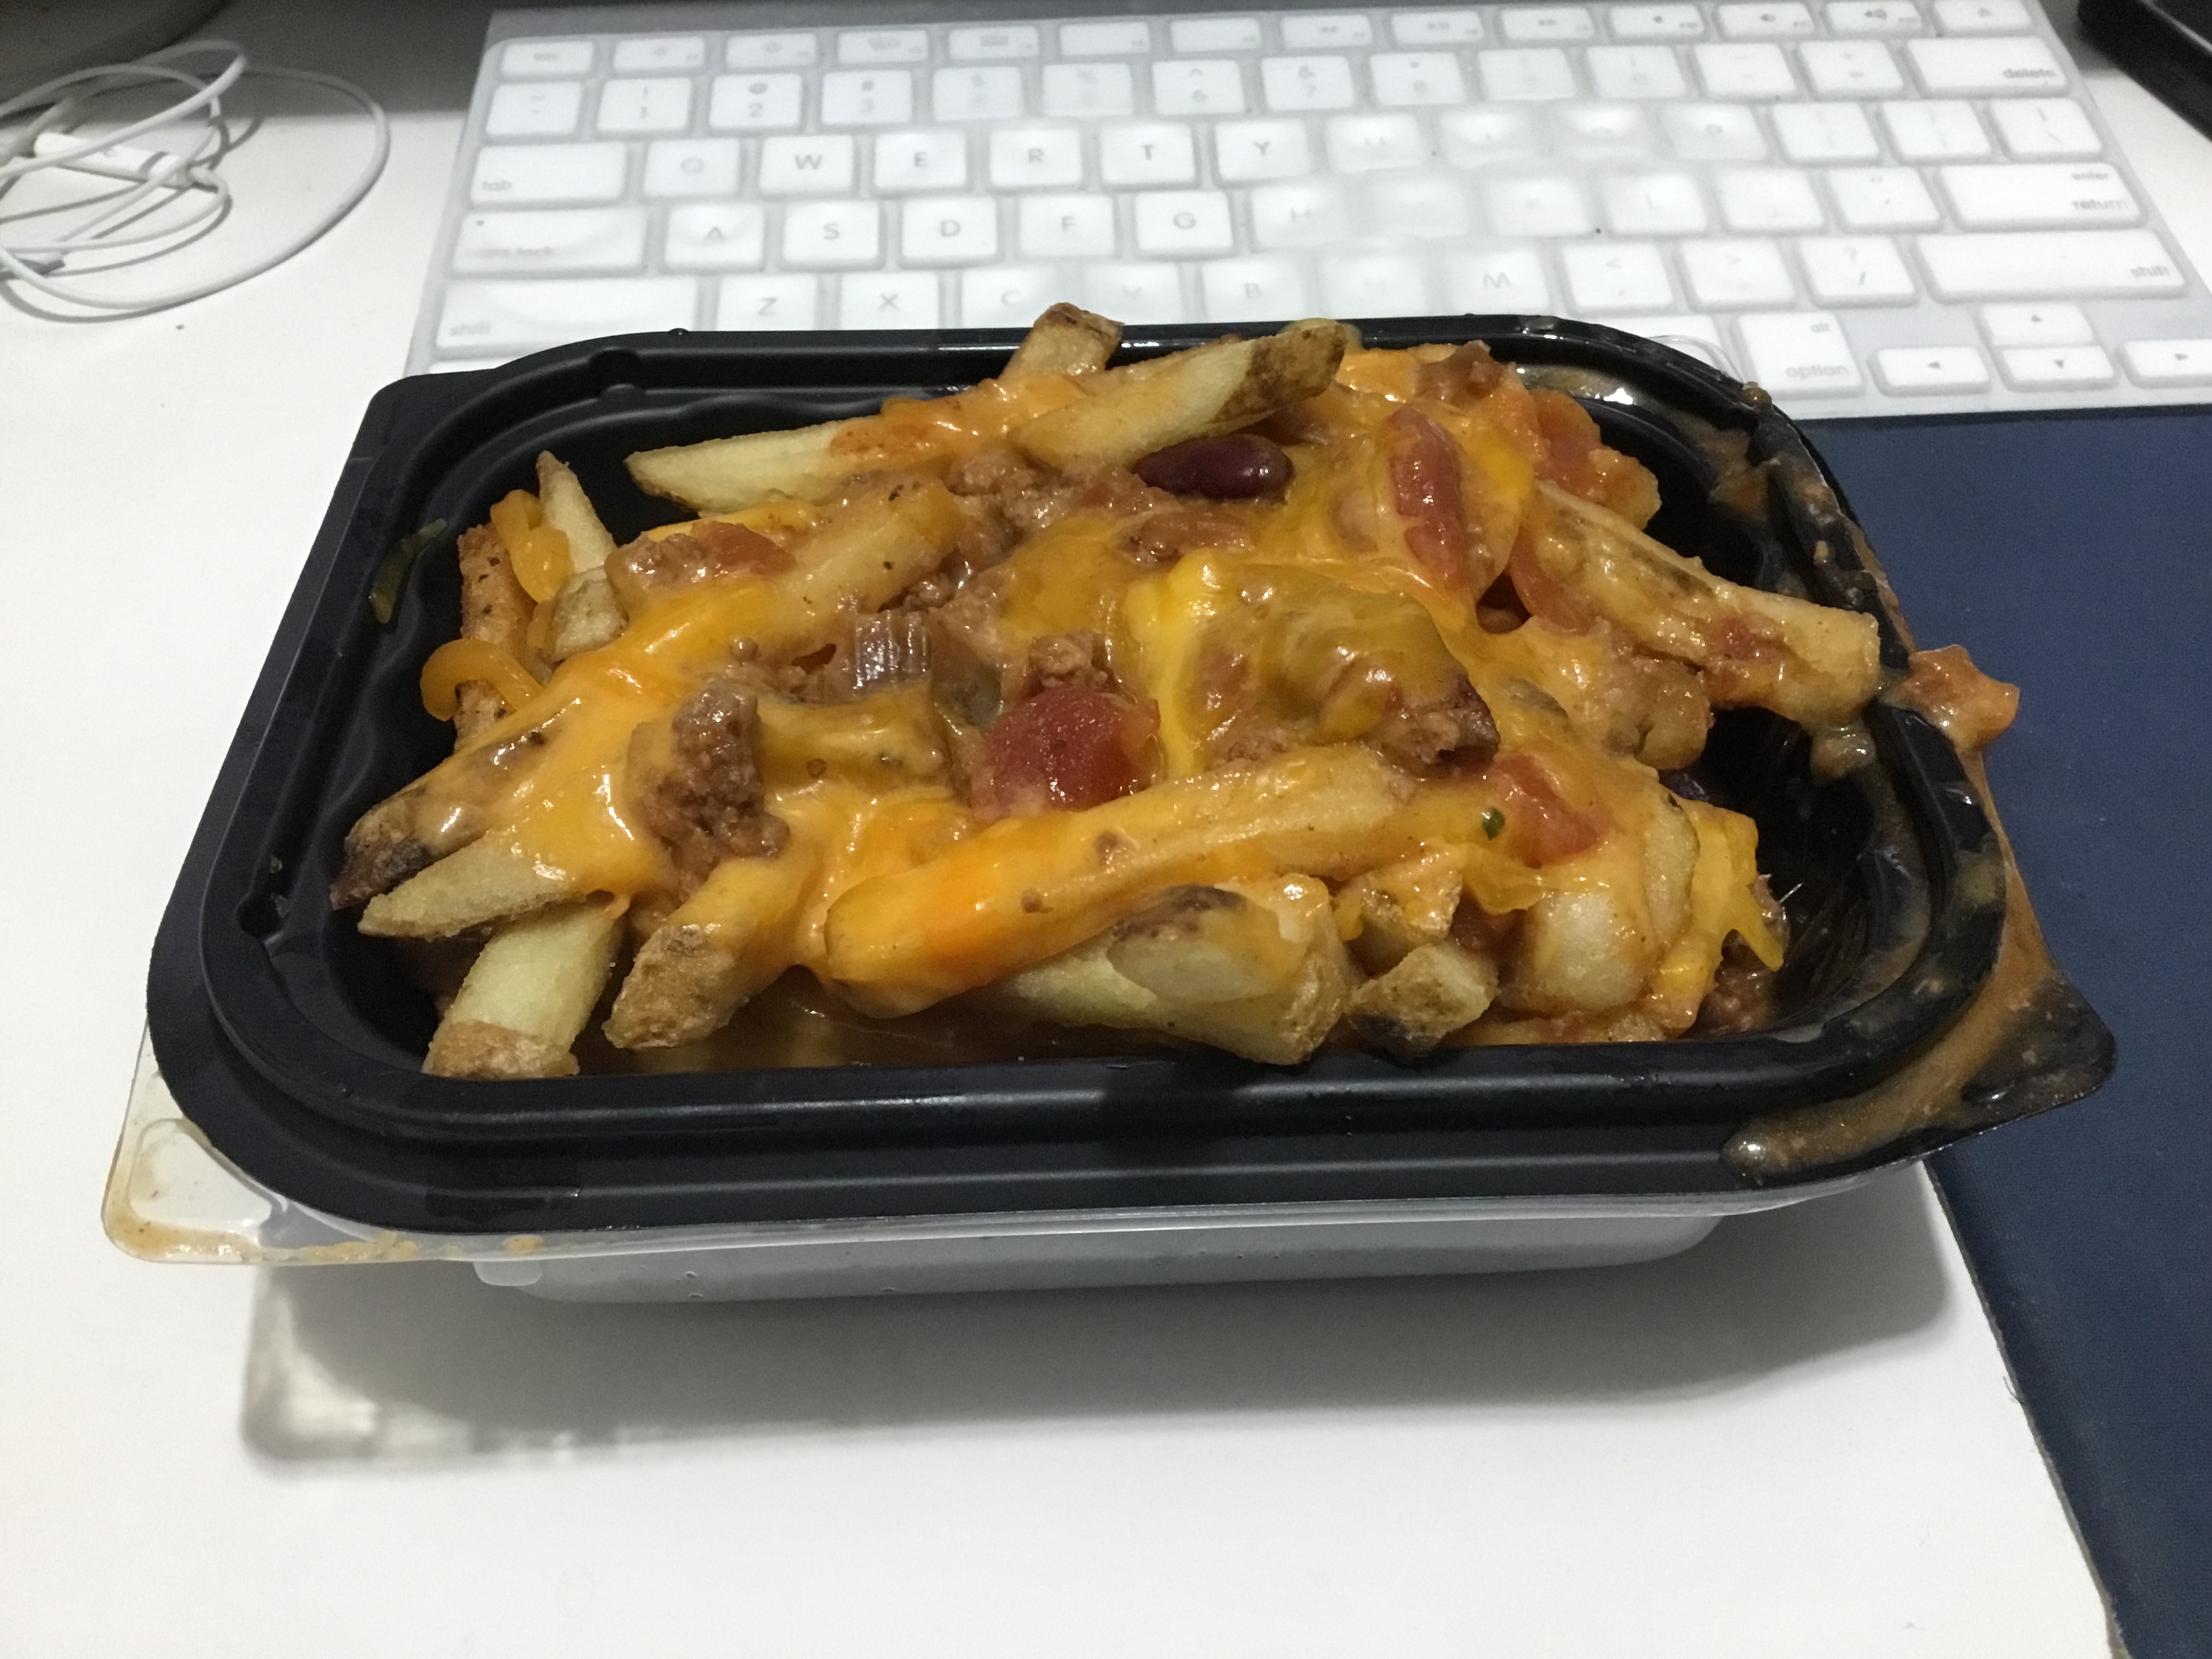 Wendys Chili Cheese Fries By